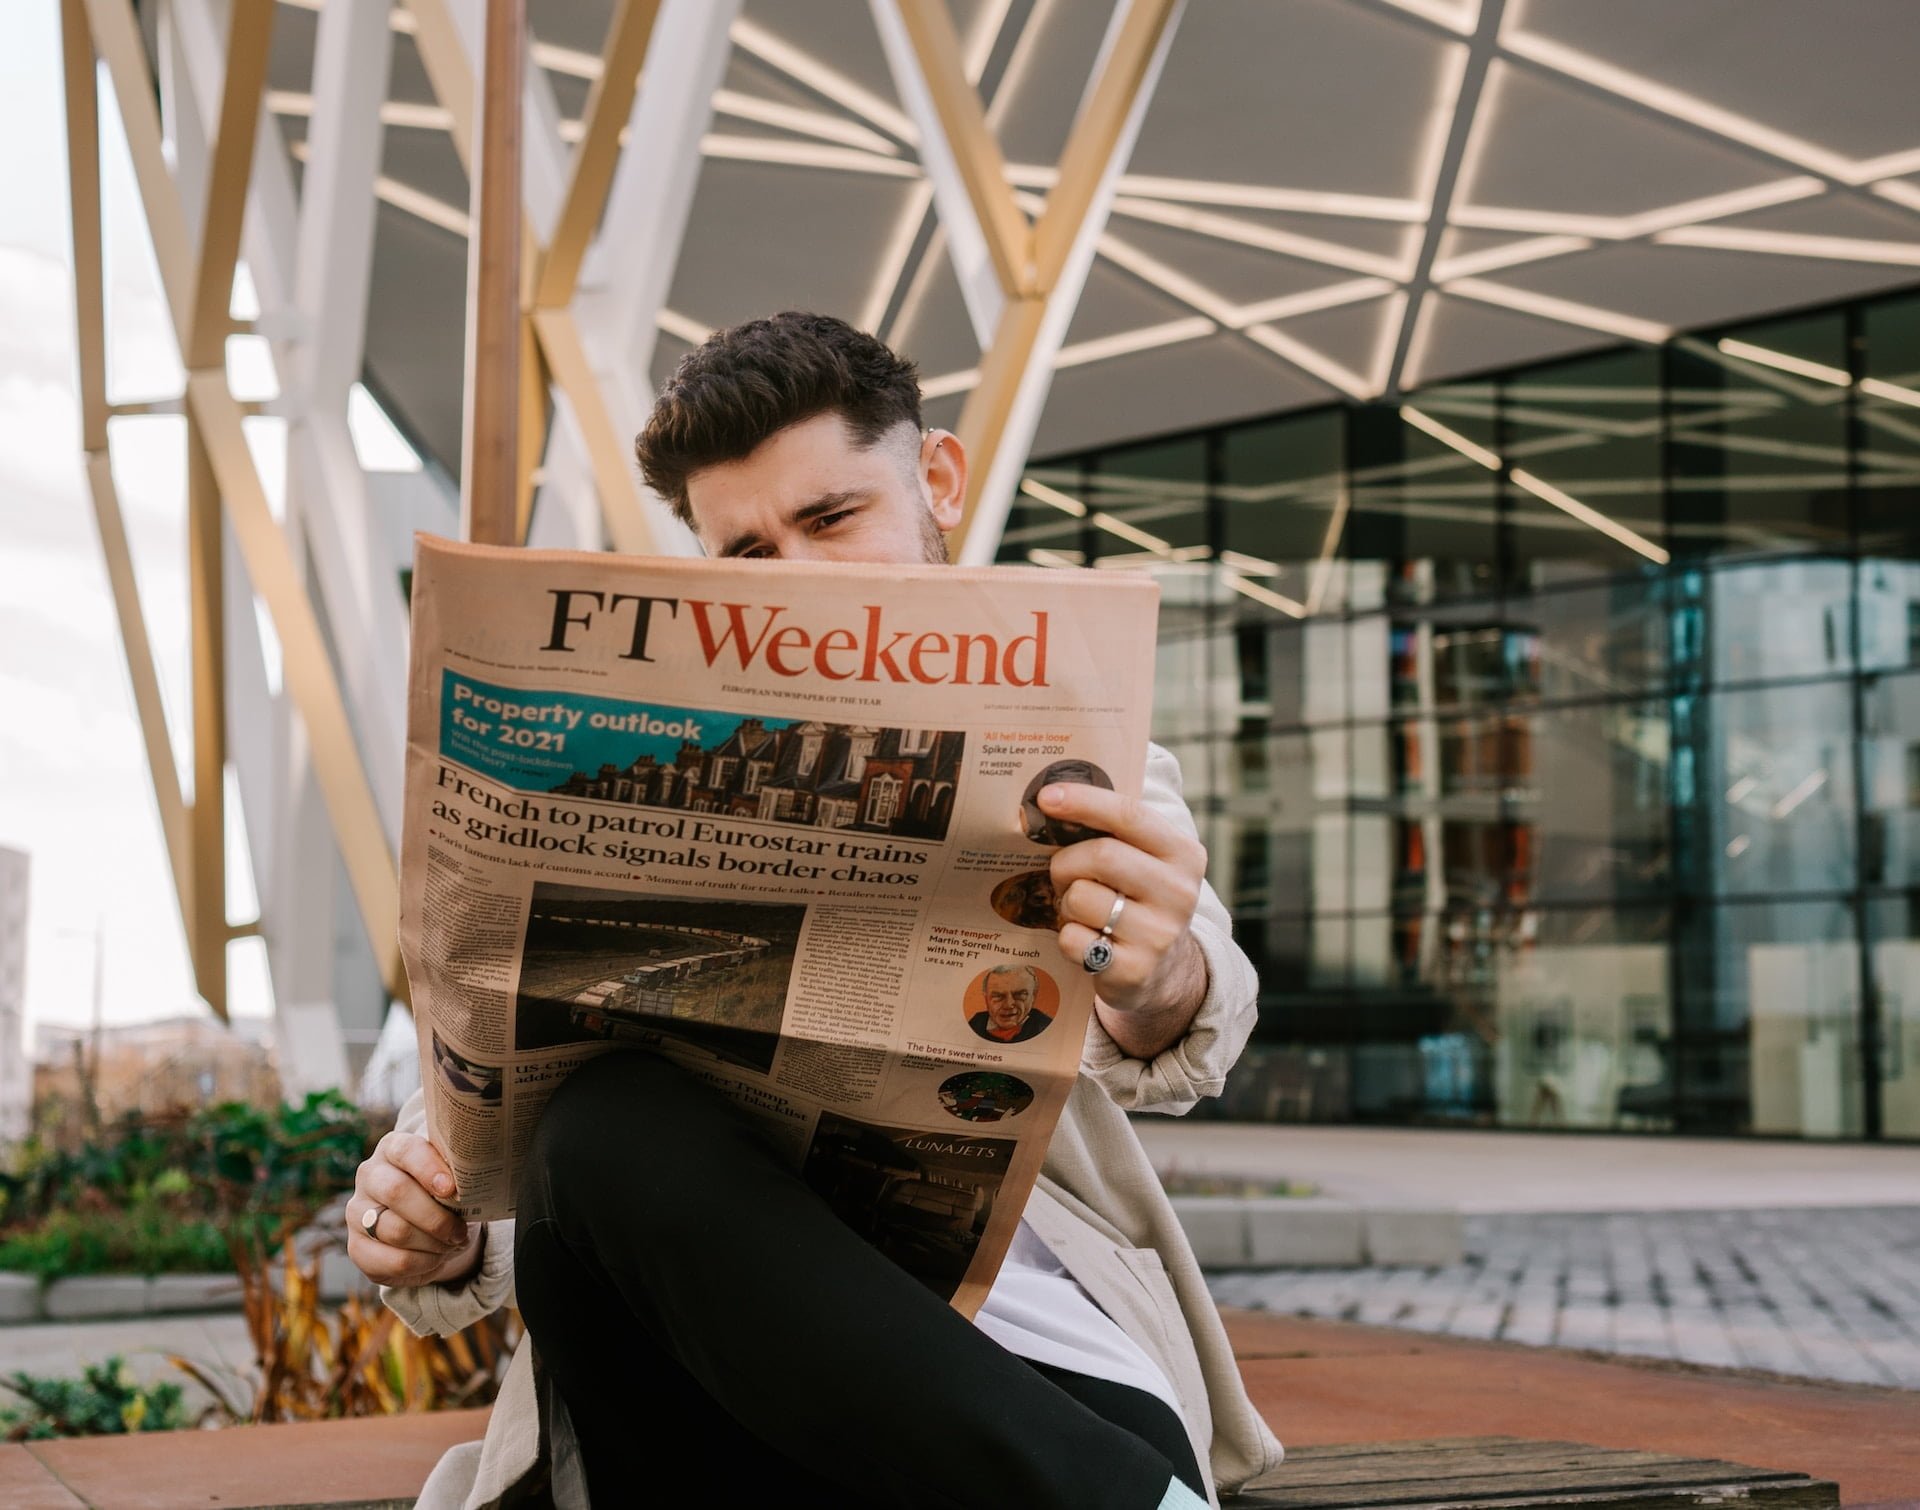 Depicts a man sitting outside and reading a financial newspaper. Used as a cover image for an article discussing alternative investment news in July.